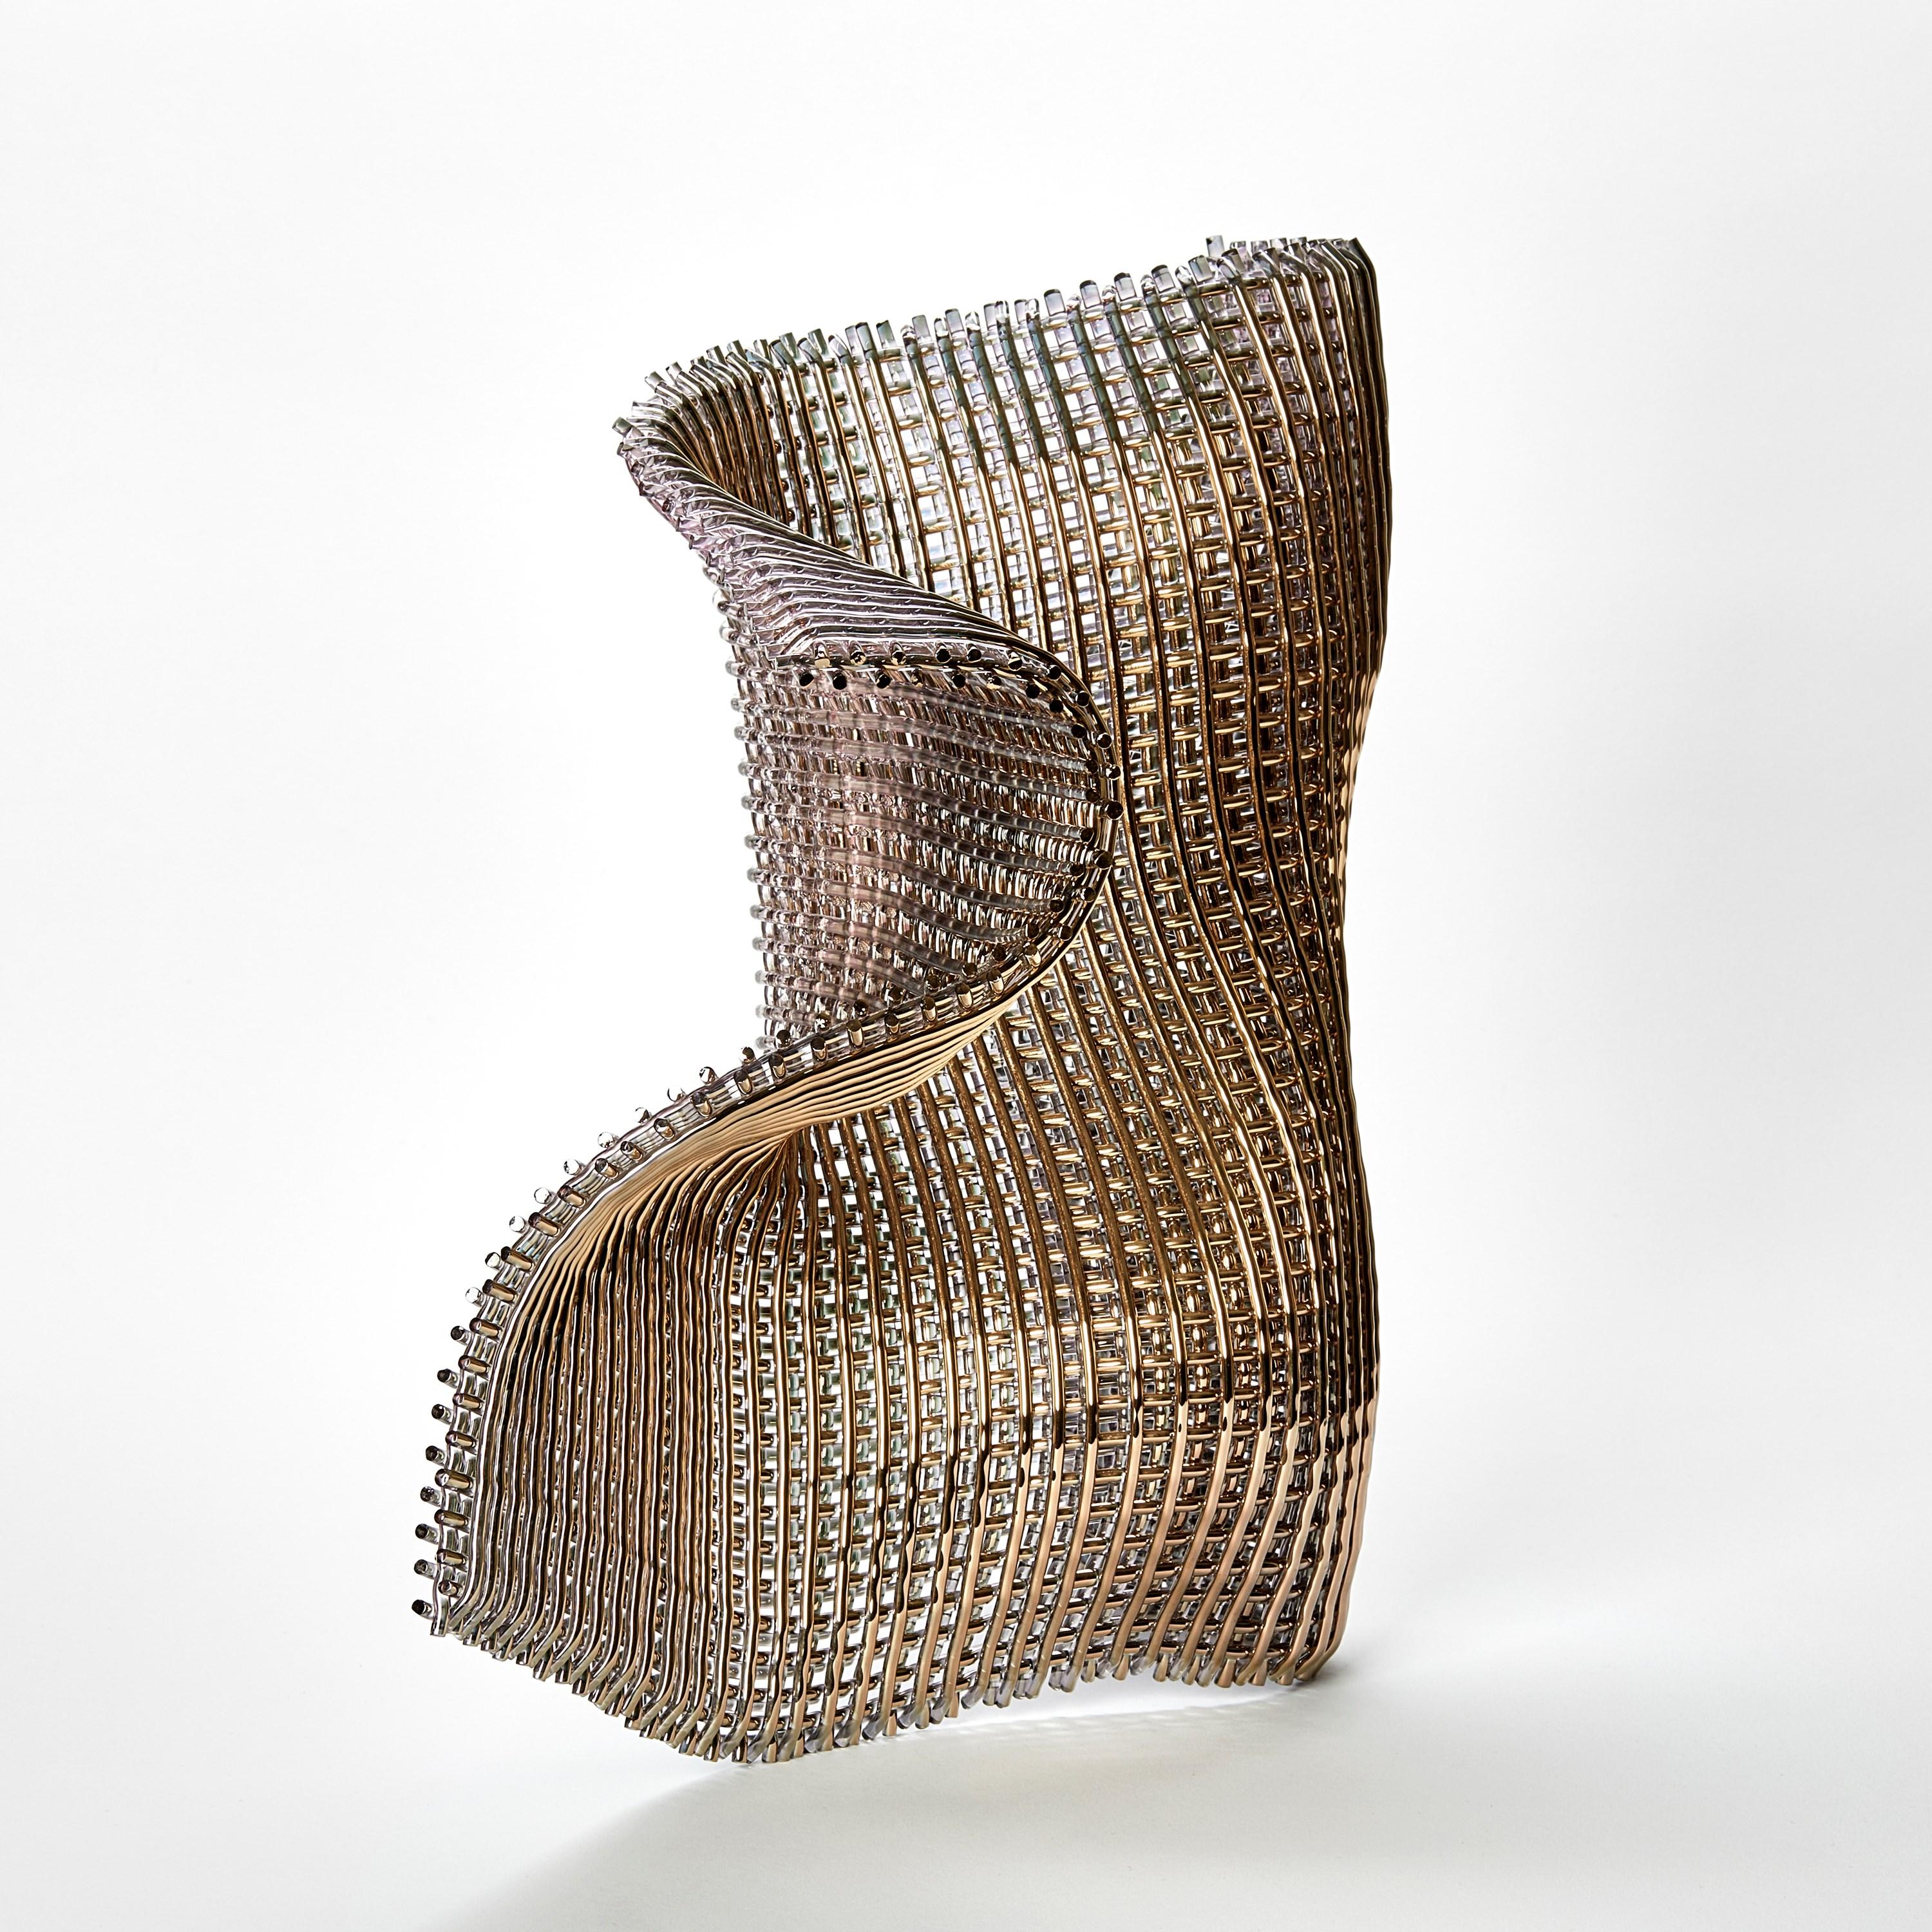 Organic Modern Masquerade, a woven gold & glass standing abstract sculpture by Cathryn Shilling